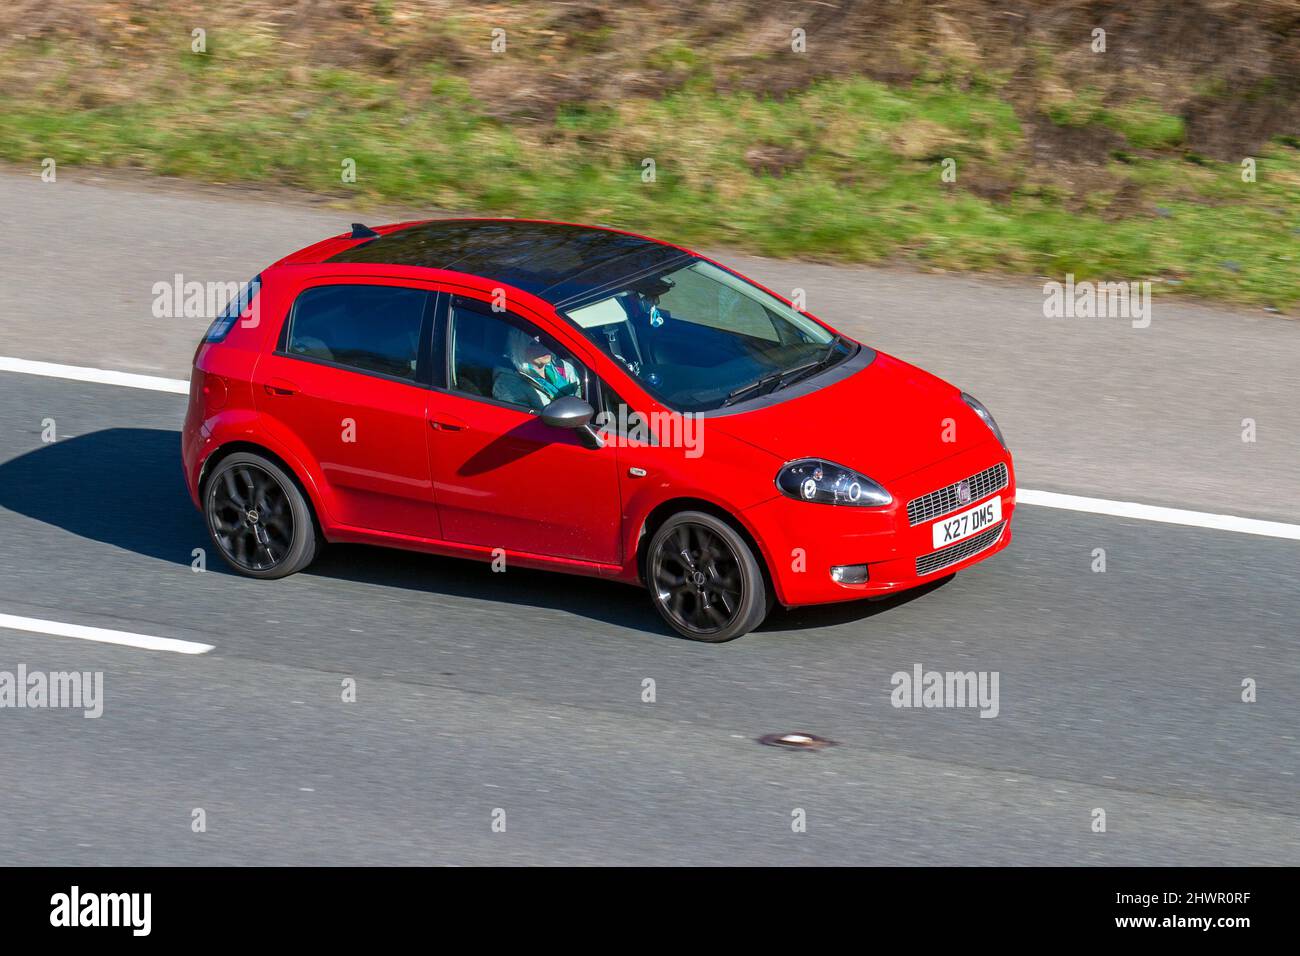 2008 red Fiat Grande Punto 1368cc 5 speed manual; Active Vehicular traffic, moving vehicles, cars, vehicle driving on UK roads, motors, motoring on the M6 motorway highway UK road network. Stock Photo